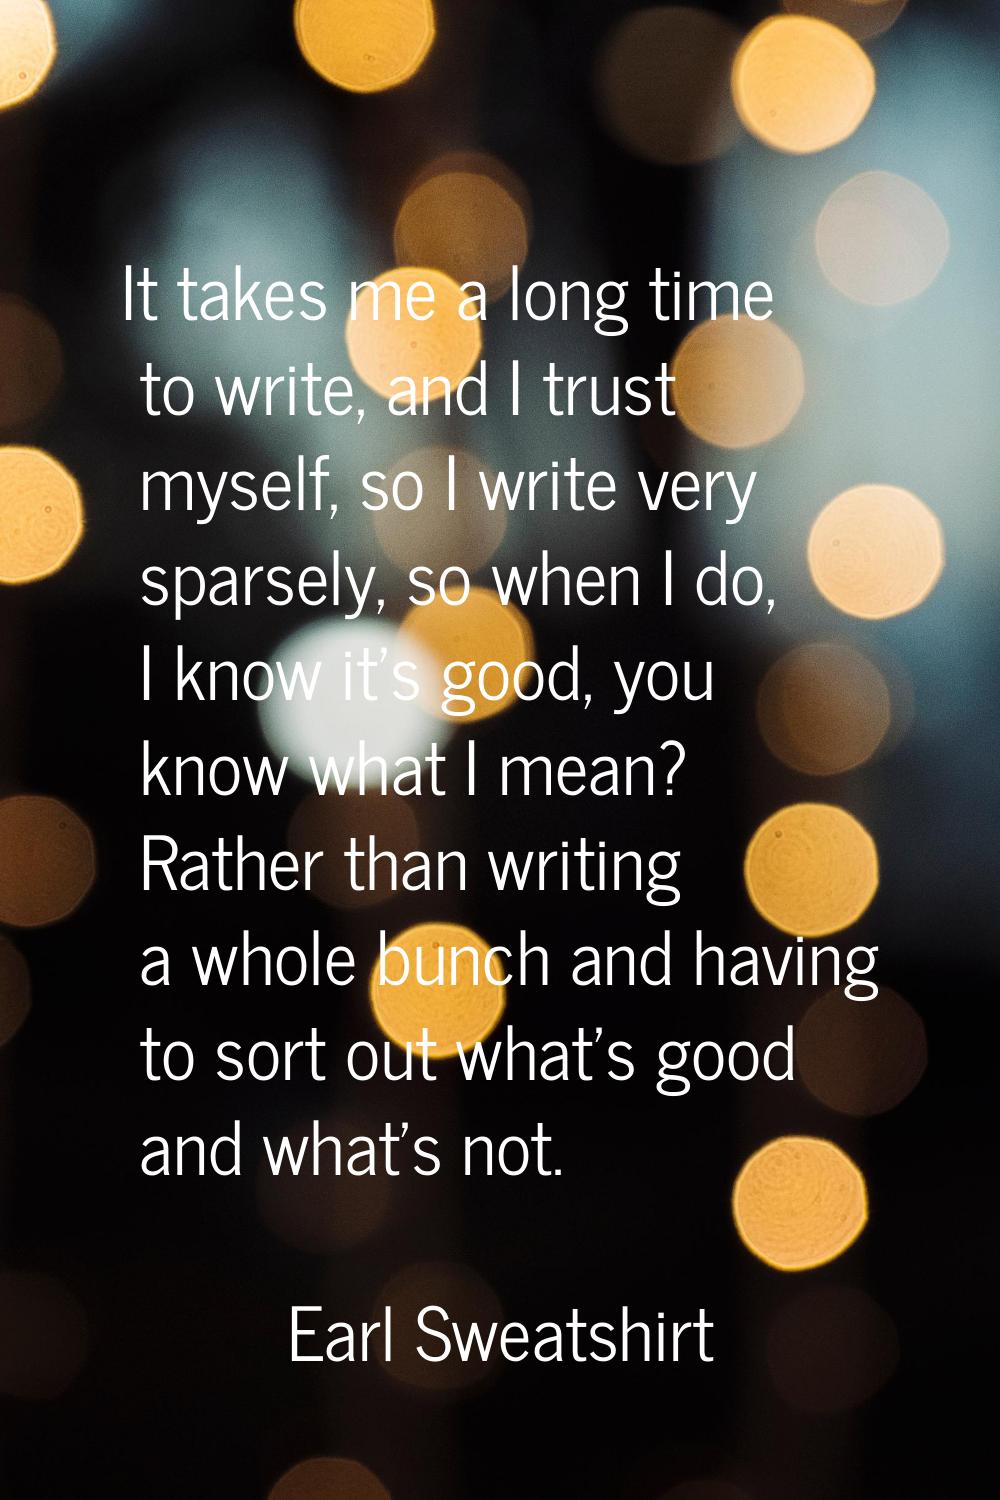 It takes me a long time to write, and I trust myself, so I write very sparsely, so when I do, I kno